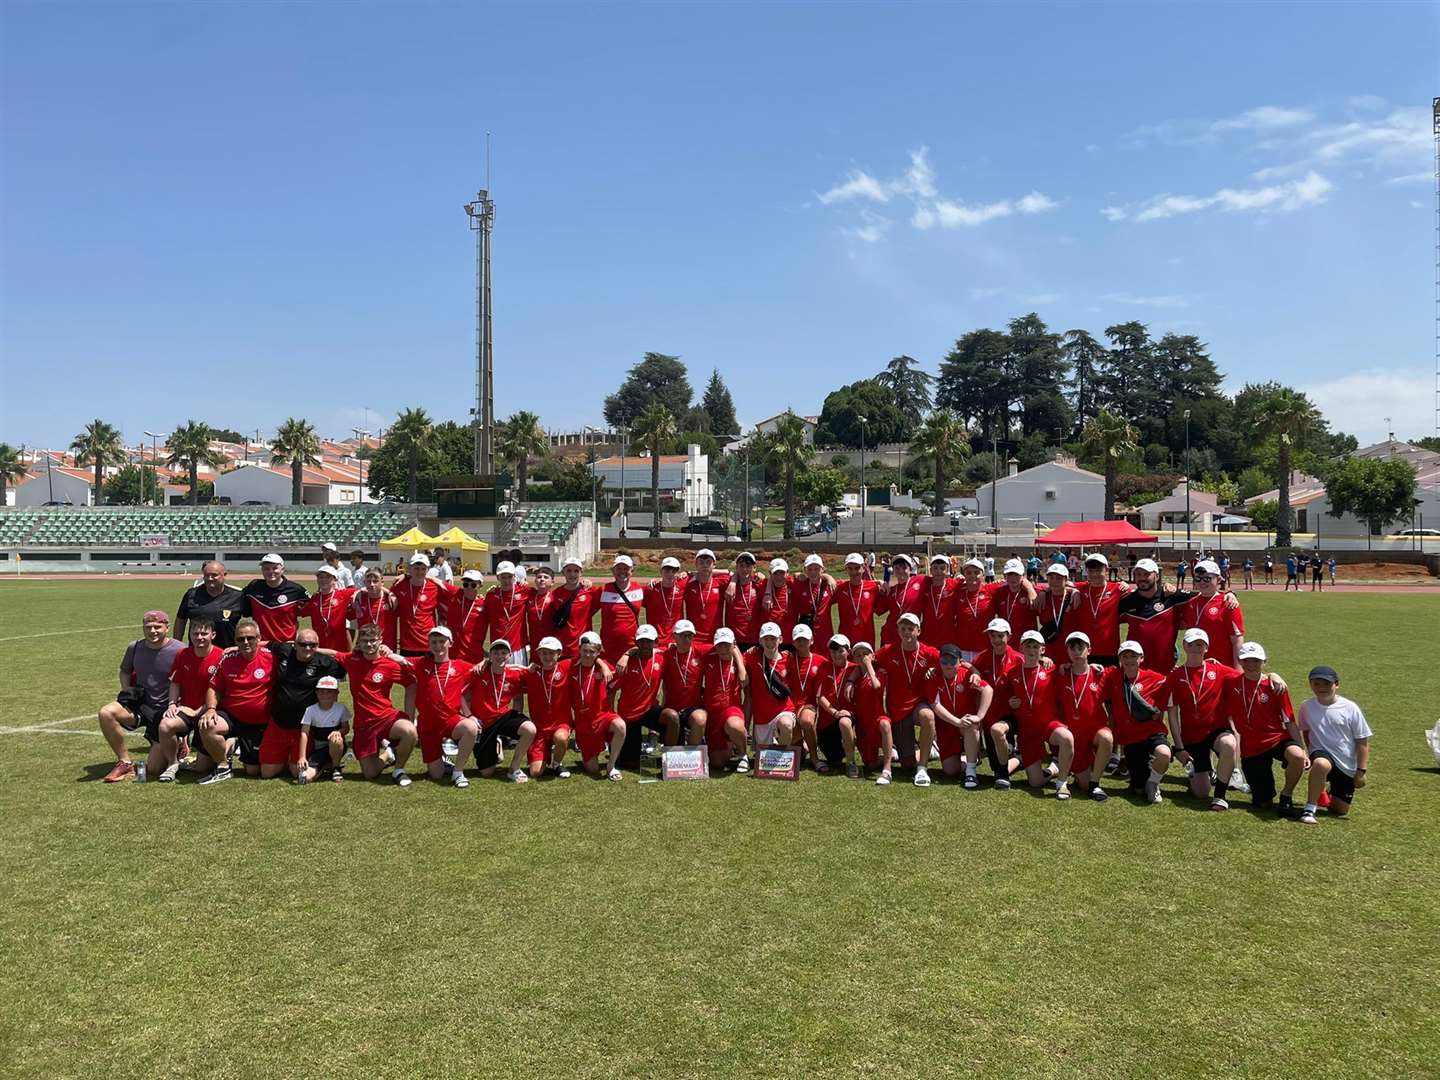 Balloan's Fury and City teams with their medals from the Castelo de Vide Cup in Portugal.